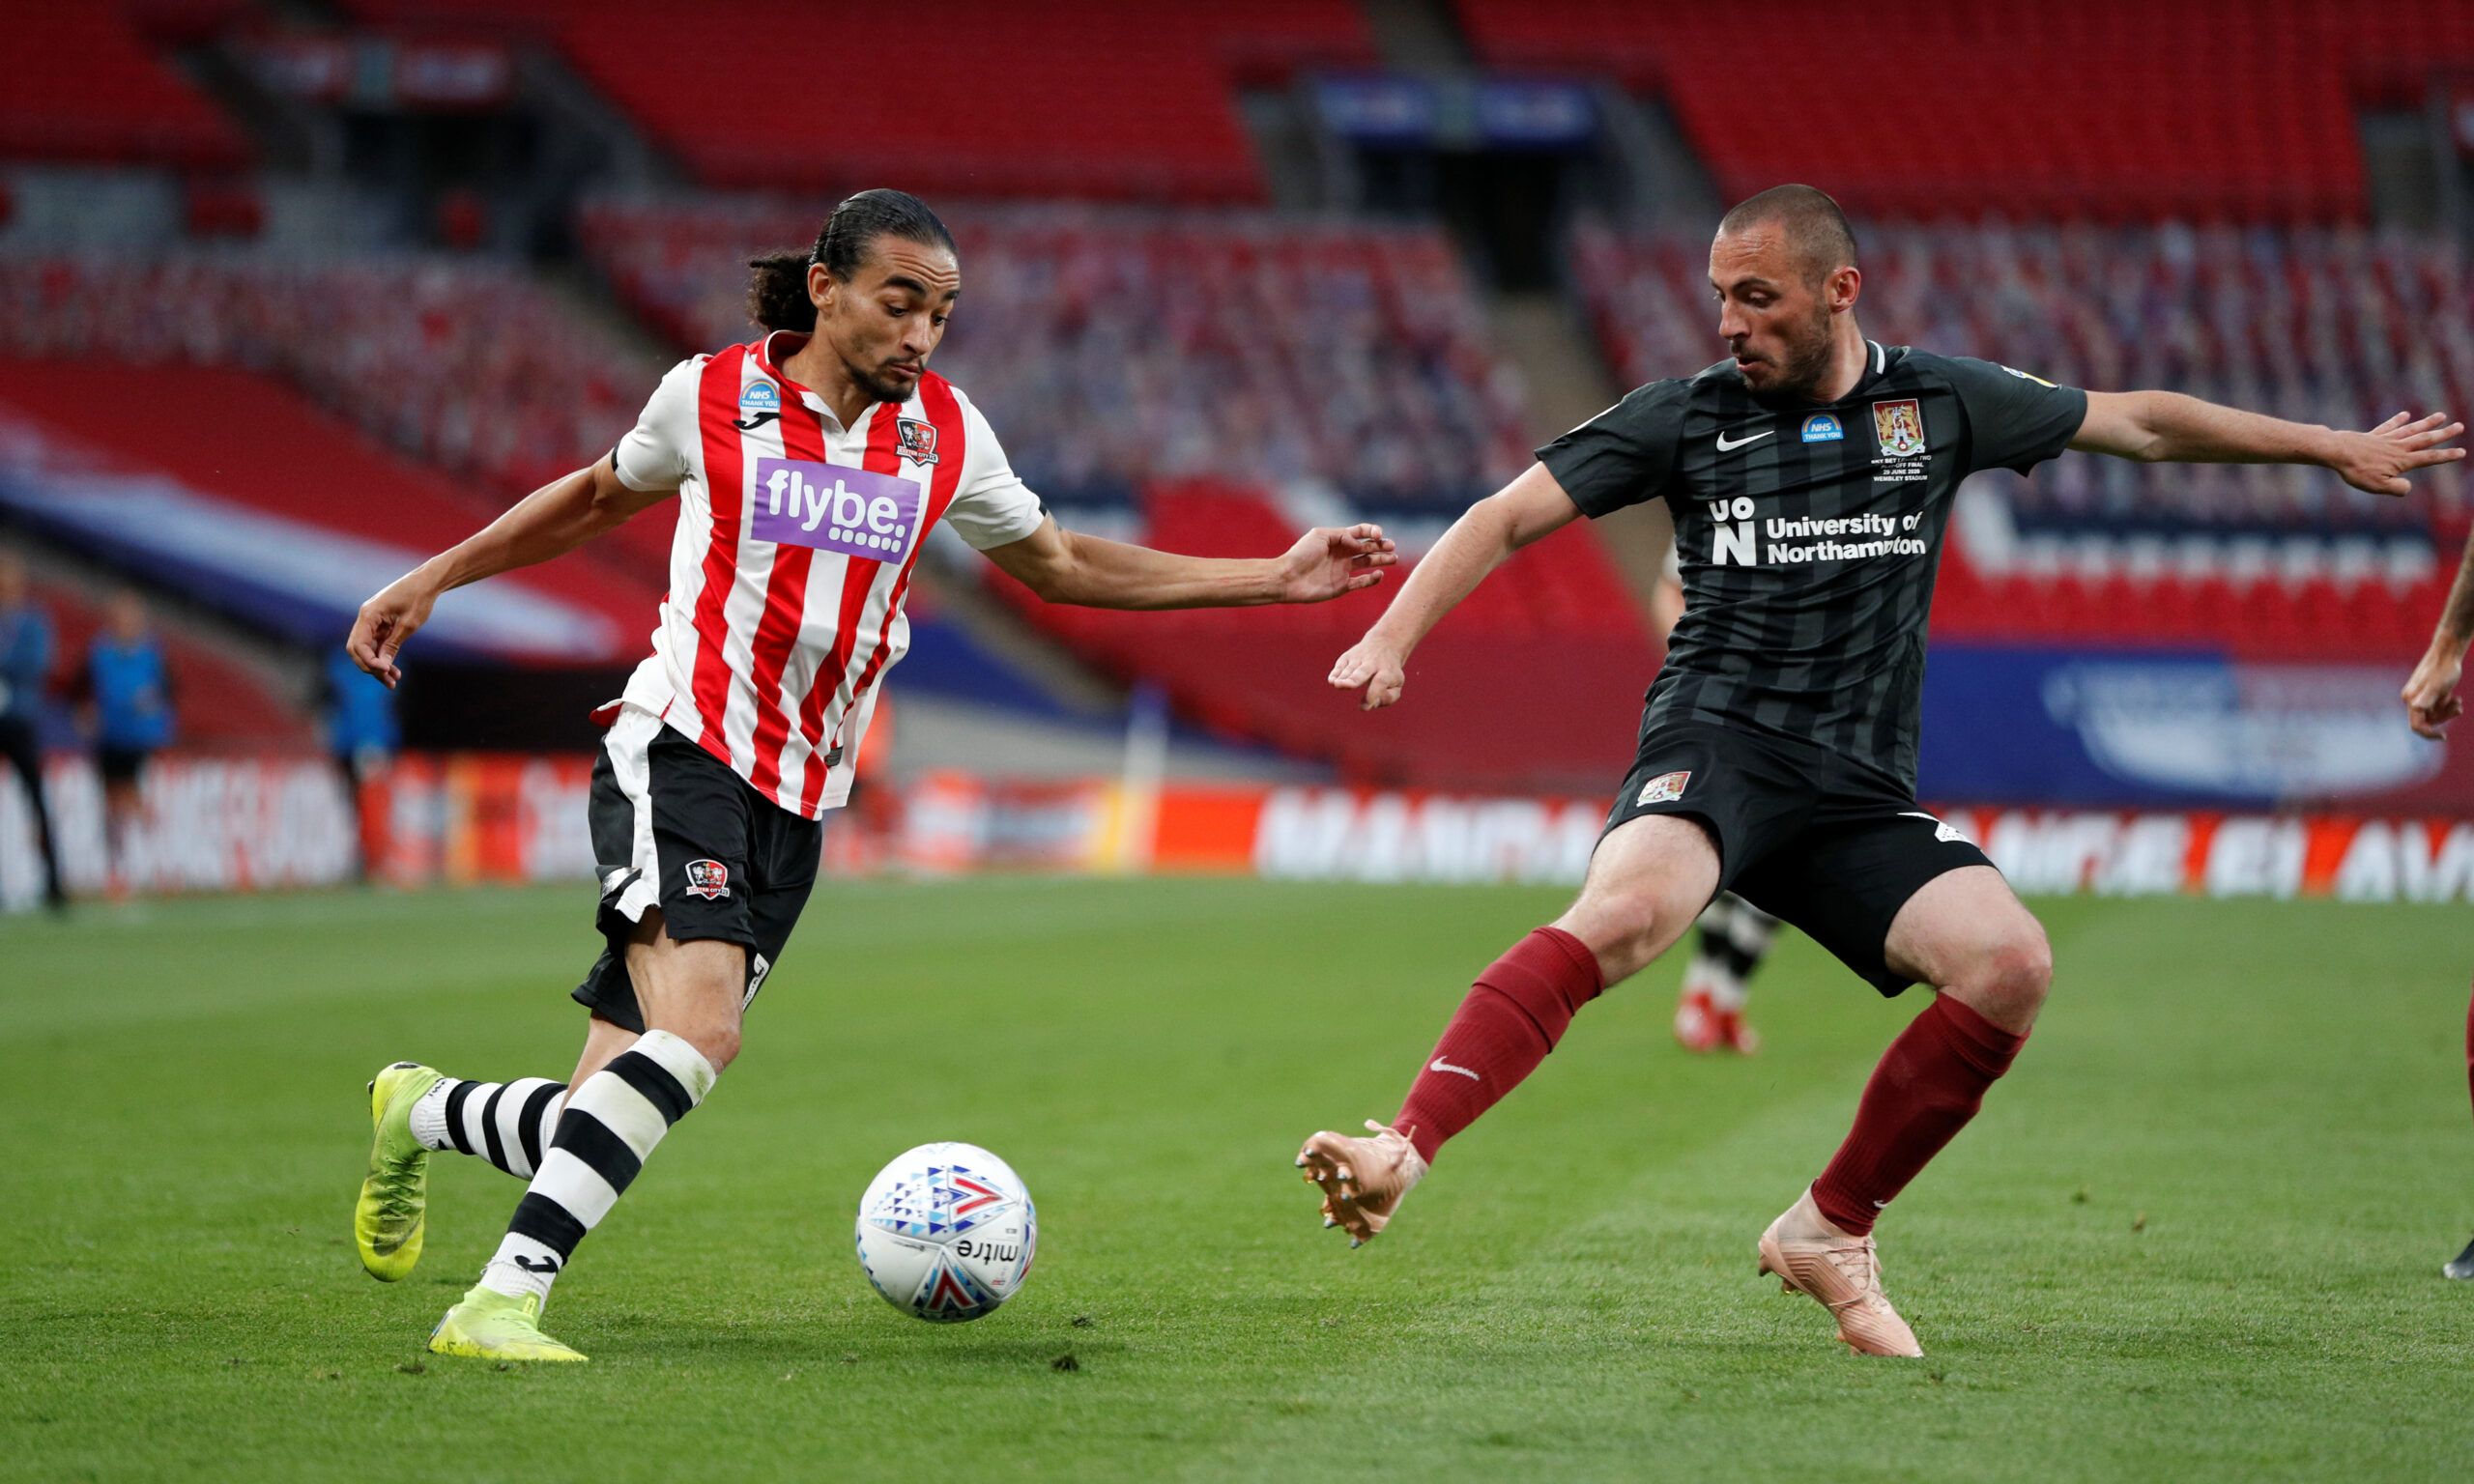 Soccer Football - League Two Play-Off Final - Exeter City v Northampton Town - Wembley Stadium, London, Britain - June 29, 2020   Exeter City's Randell Williams in action with Northampton Town's Michael Harriman, as play resumes behind closed doors following the outbreak of the coronavirus disease (COVID-19)   Action Images/John Sibley    EDITORIAL USE ONLY. No use with unauthorized audio, video, data, fixture lists, club/league logos or 